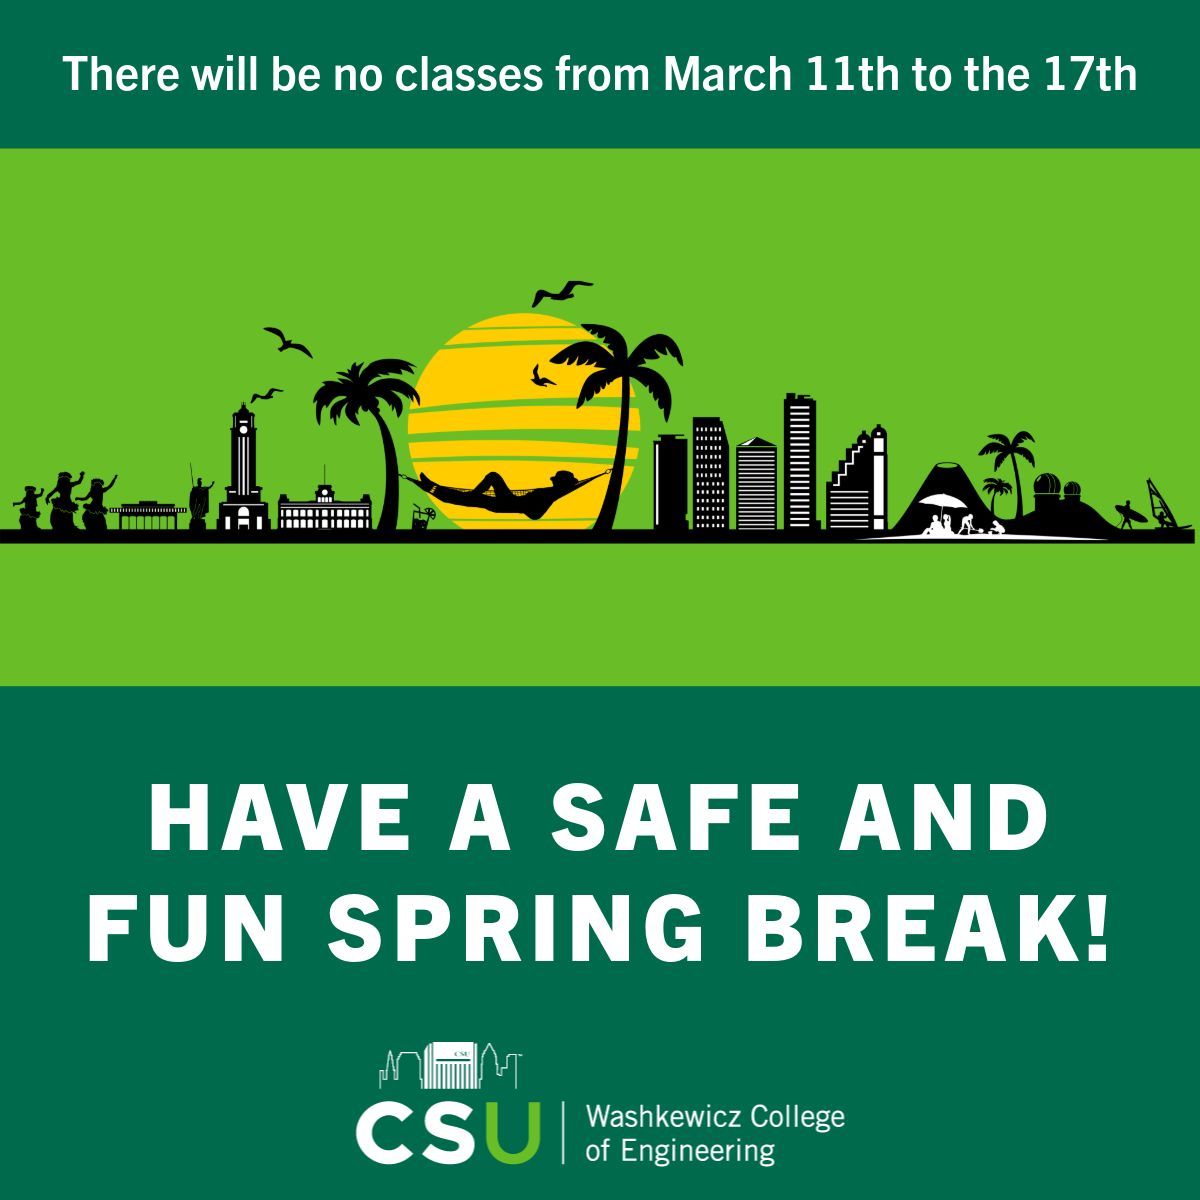 There will be no classes from March 11th to March 17th. Enjoy your spring break!